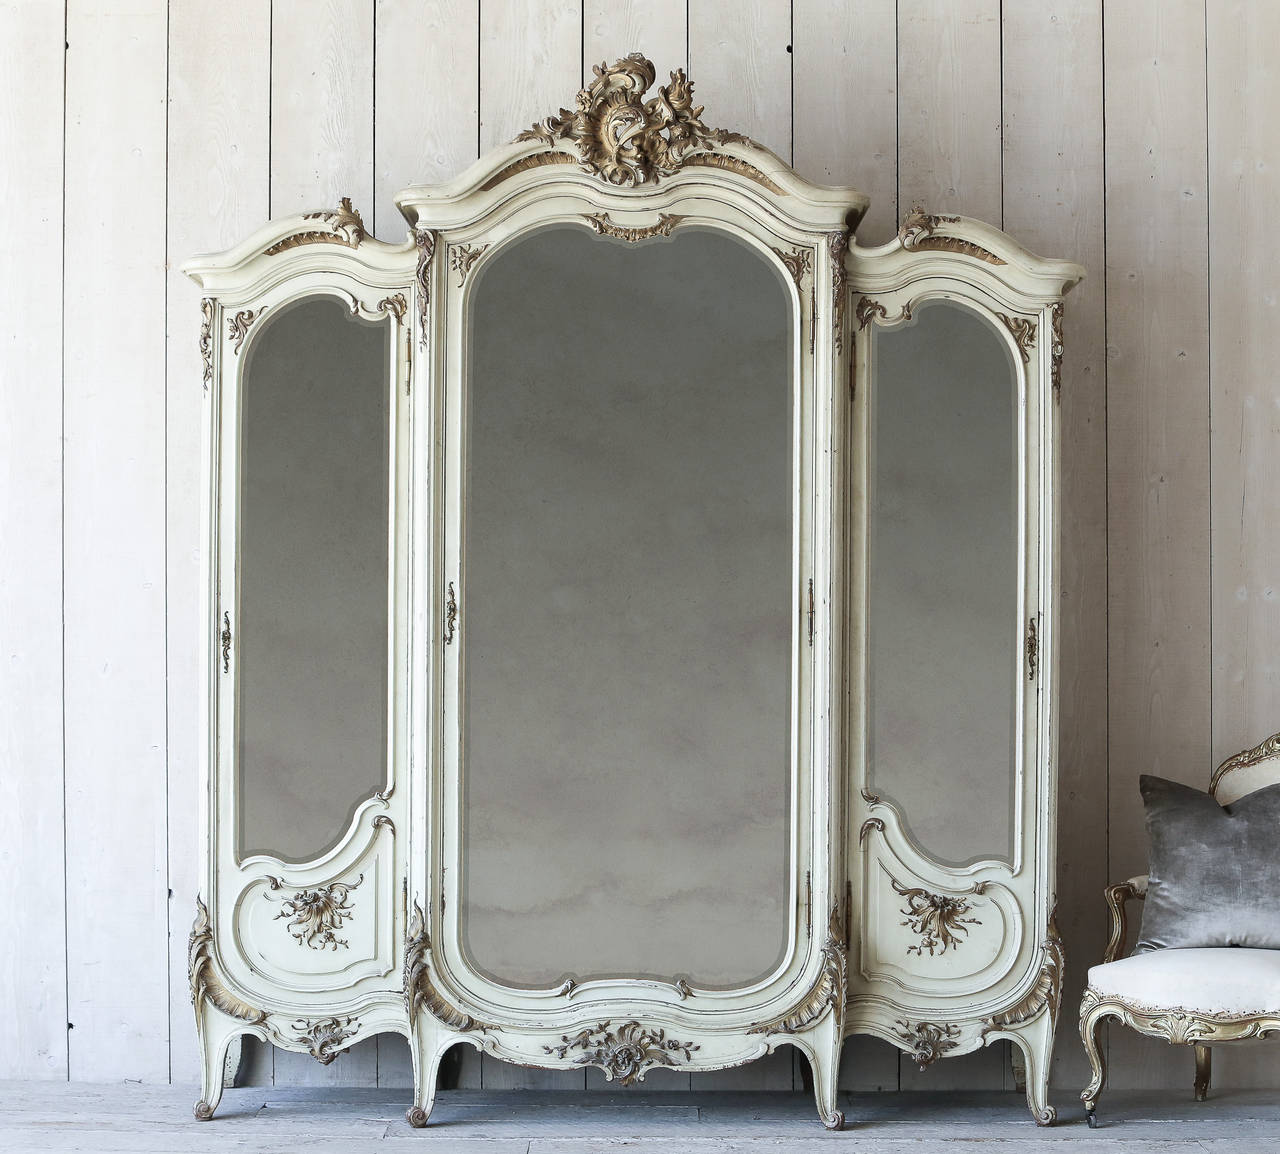 Breathtaking French antique armoire in an eggshell finish with deep gilt highlights. Flower carvings wrap this piece in grand Baroque luxury. The original beveled mirror glass is beautifully aged to perfection. Includes original keys!